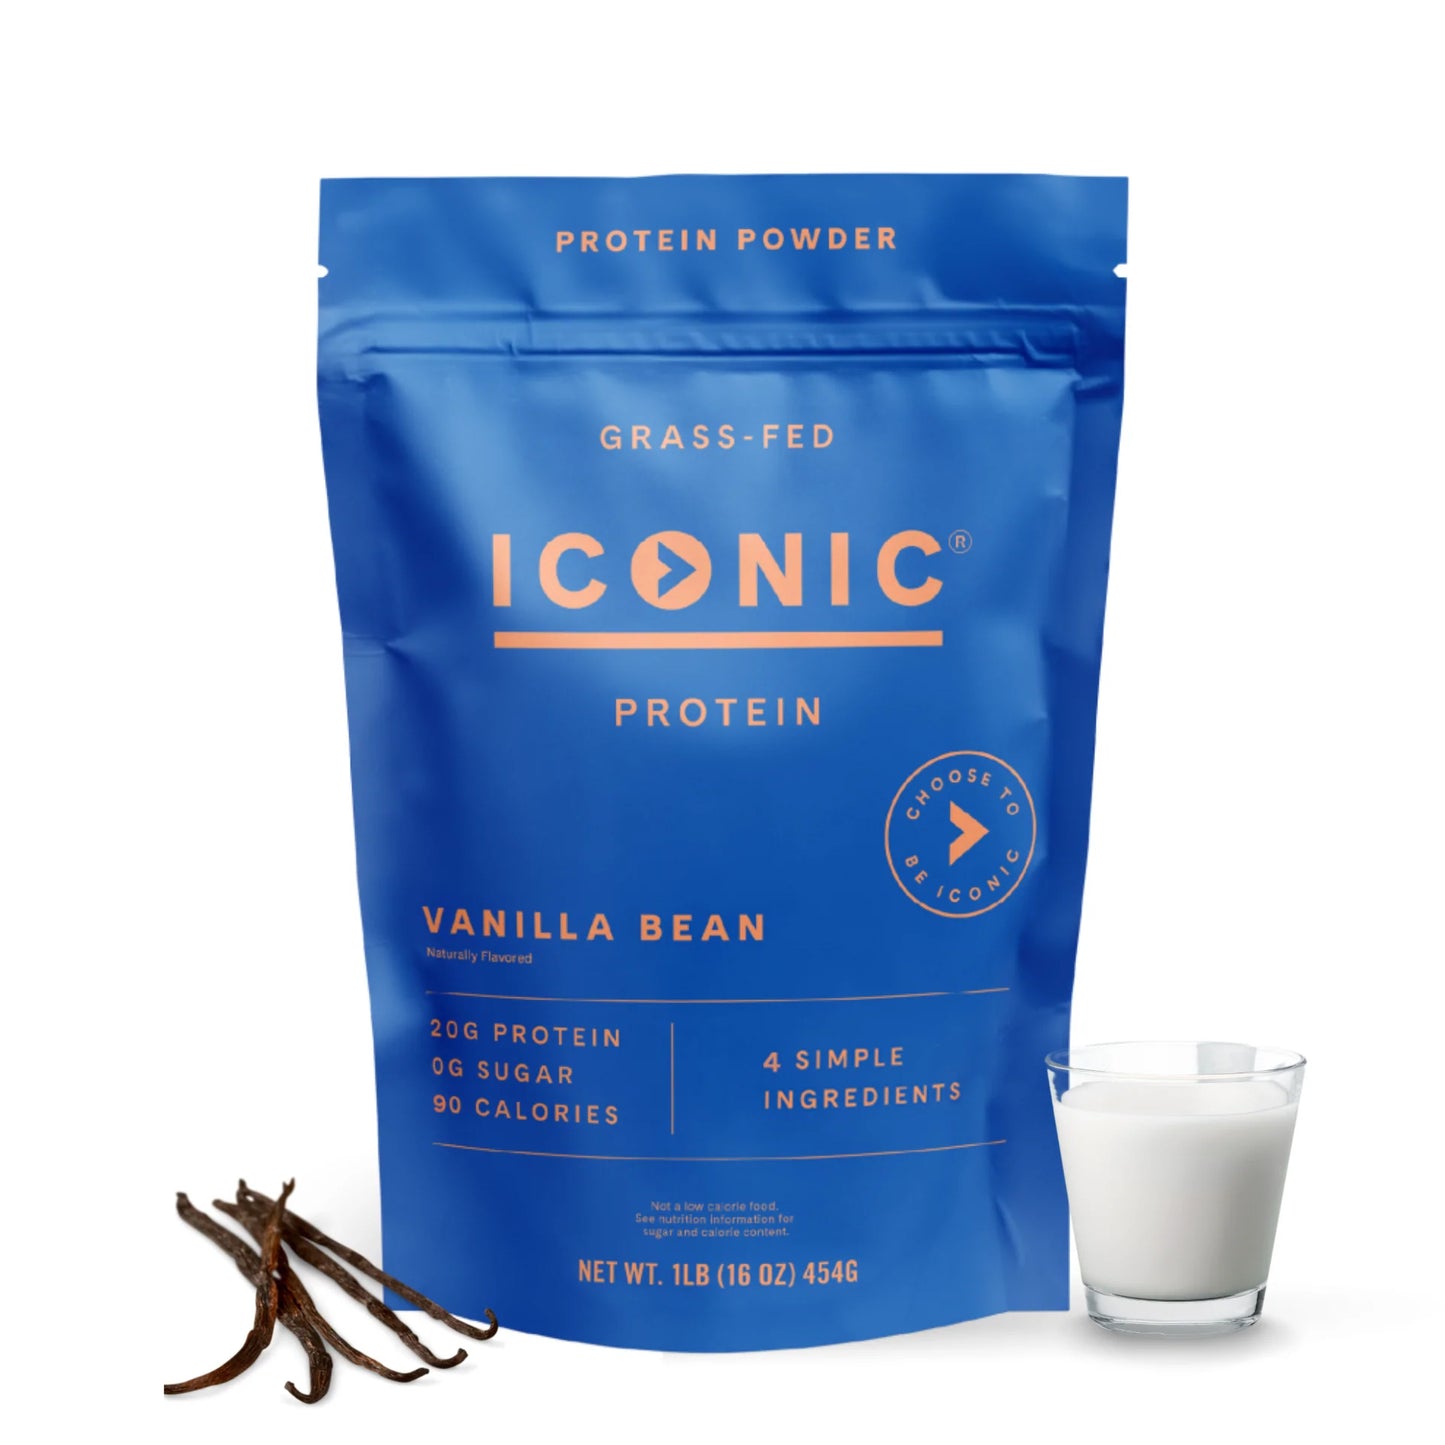 ICONIC sugarfree vanilla protein powder in a blue bag on a white background. 18 servings per bag.